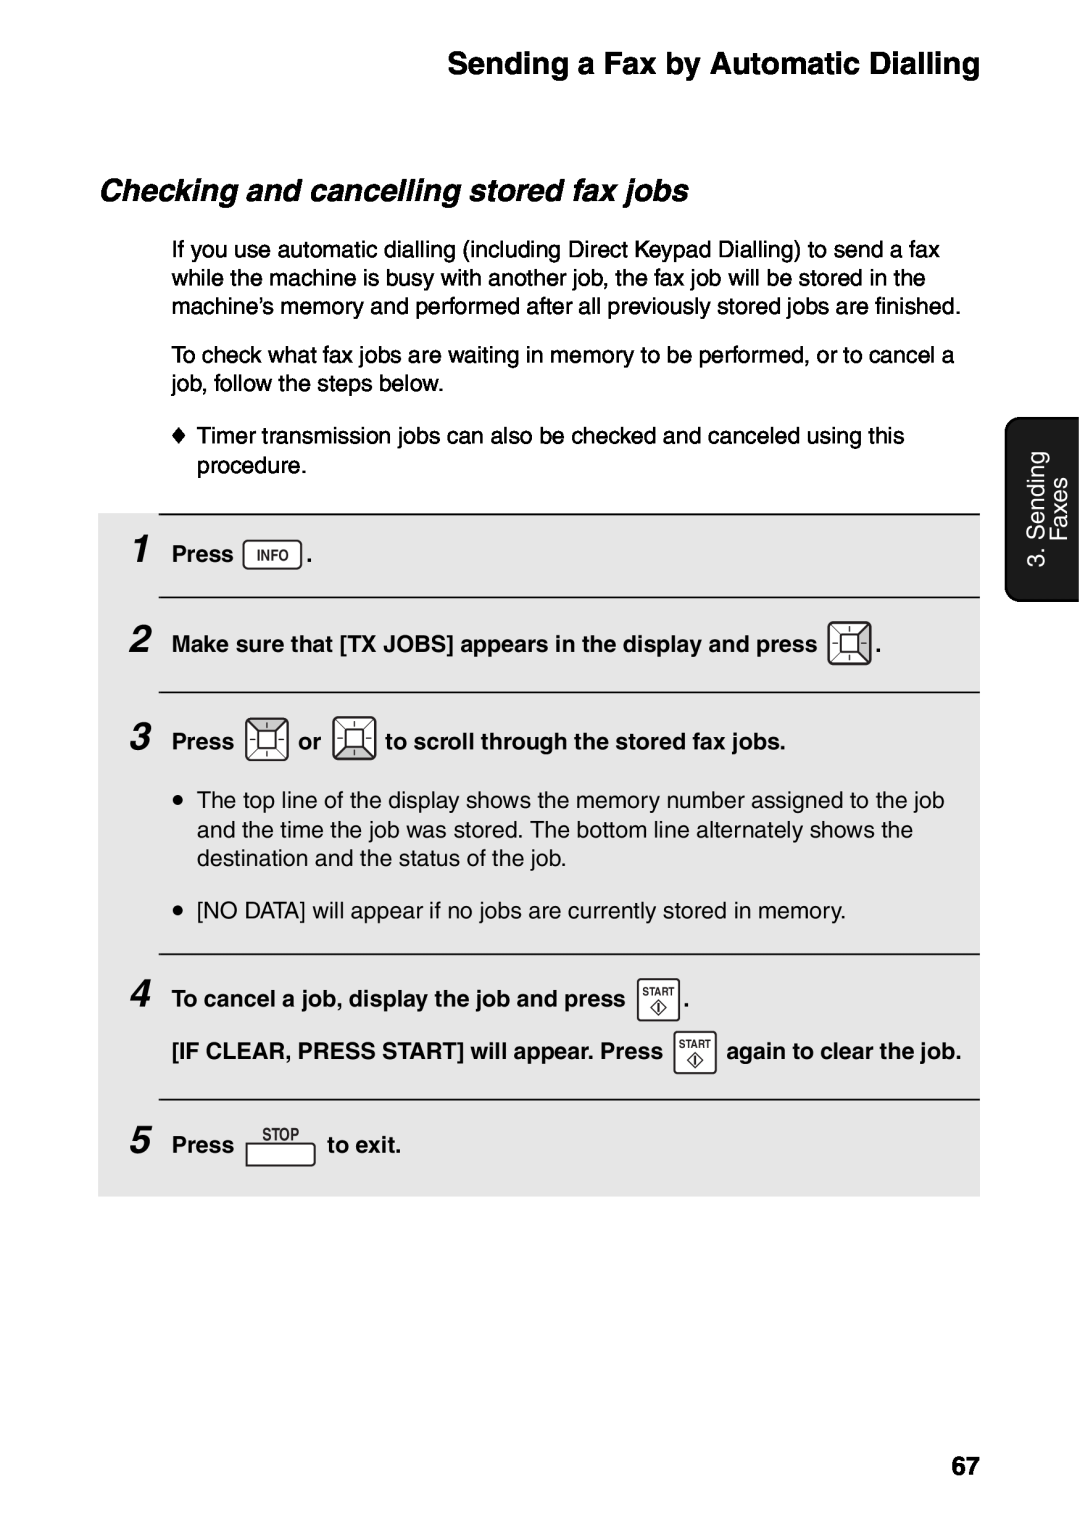 Sharp FO-IS115N operation manual Checking and cancelling stored fax jobs, Sending, Faxes 